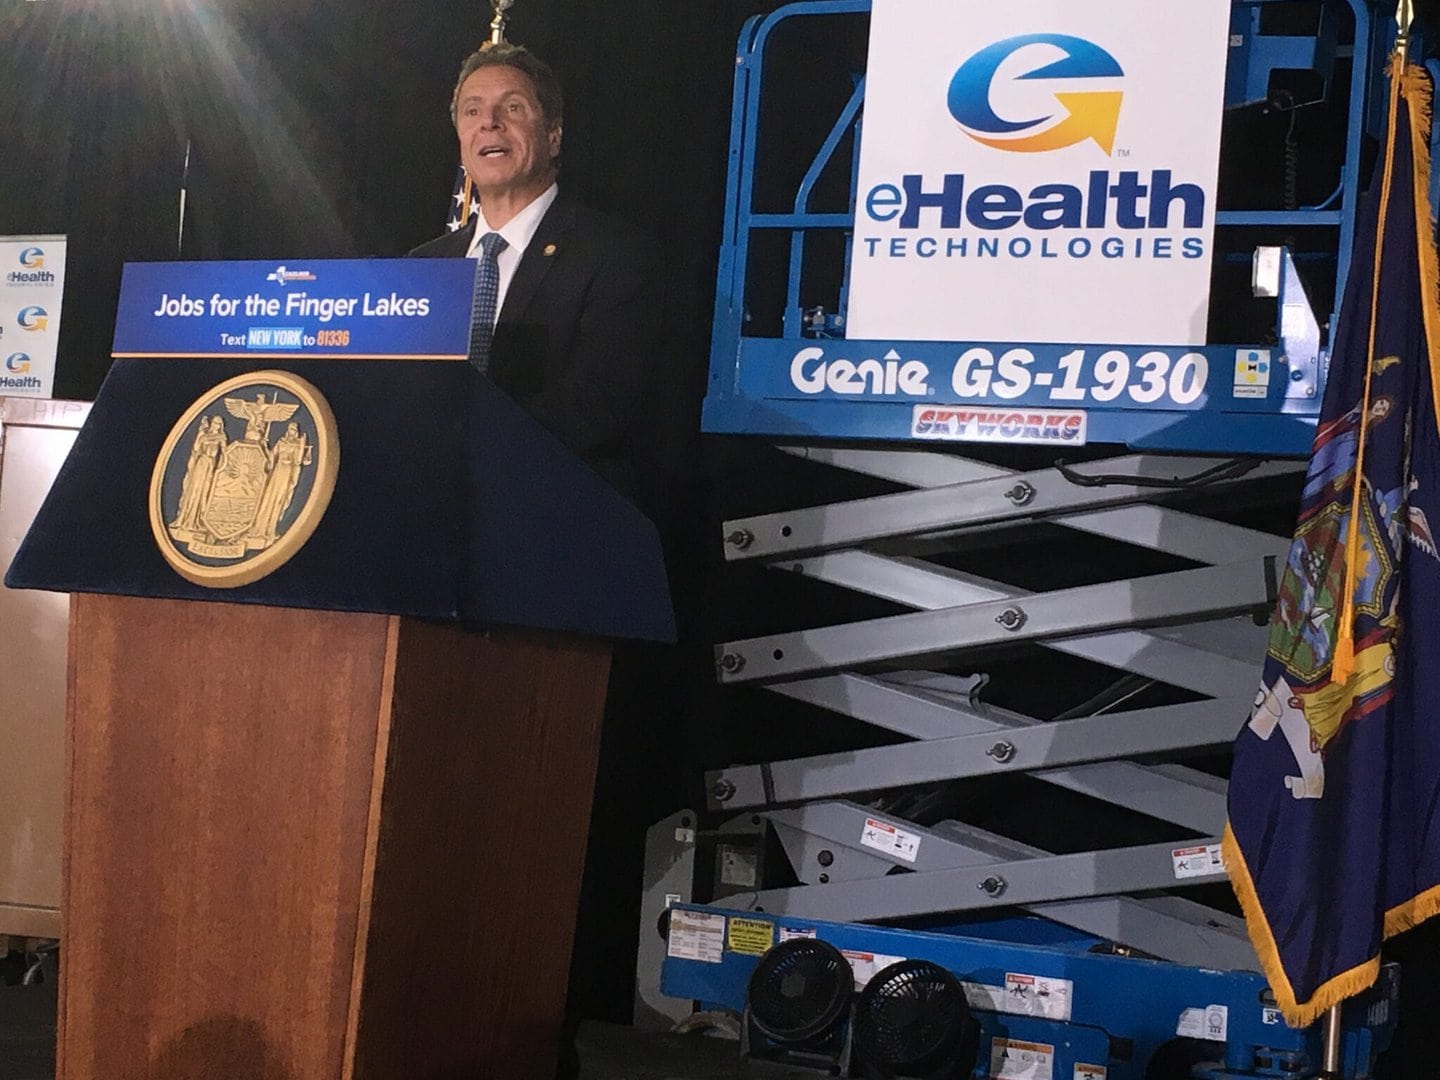 Governor Cuomo's statement about growth at eHealth Technologies